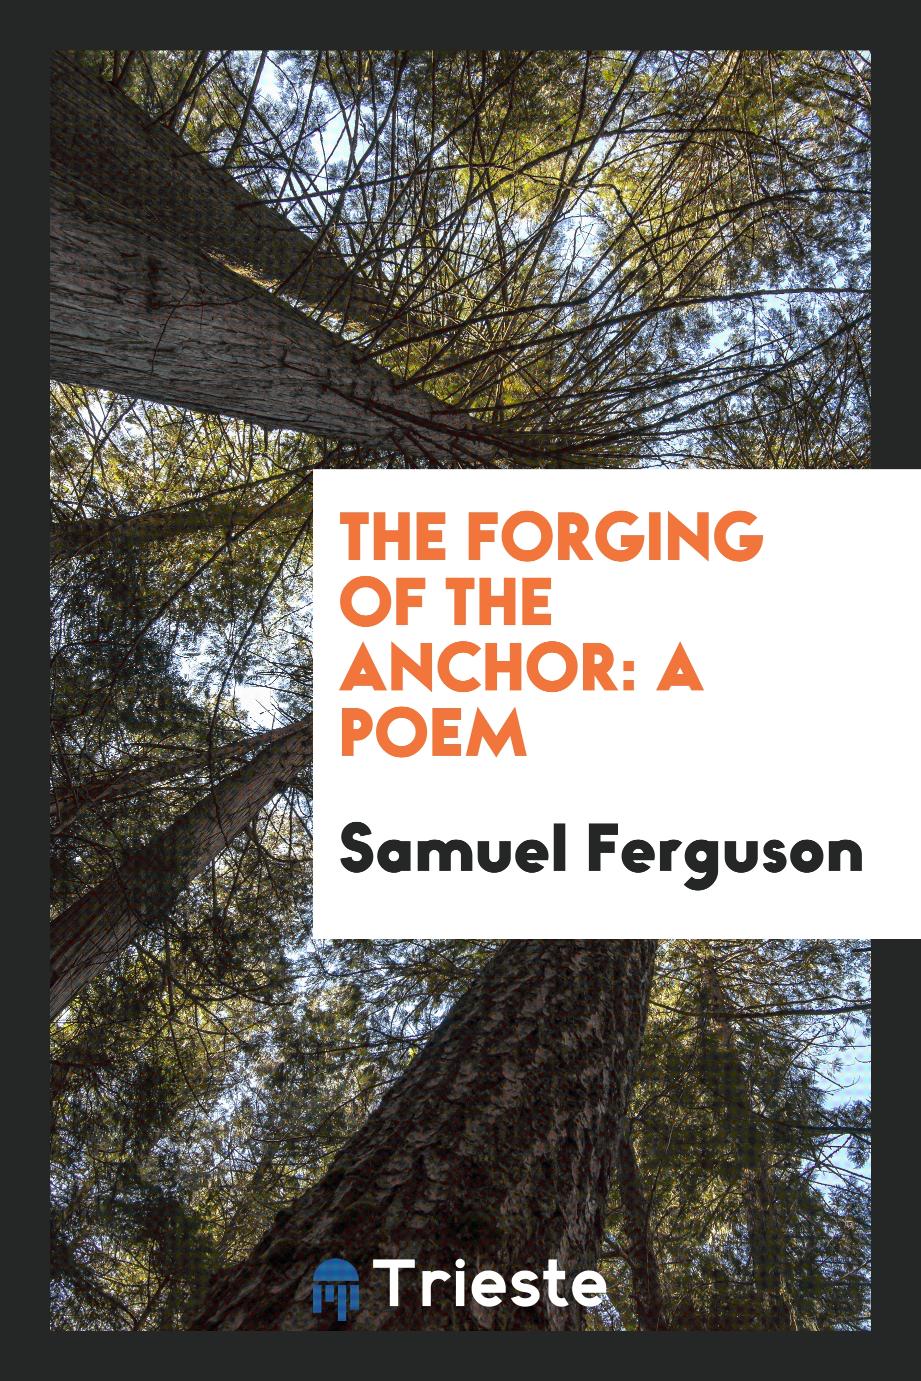 The Forging of the Anchor: A Poem